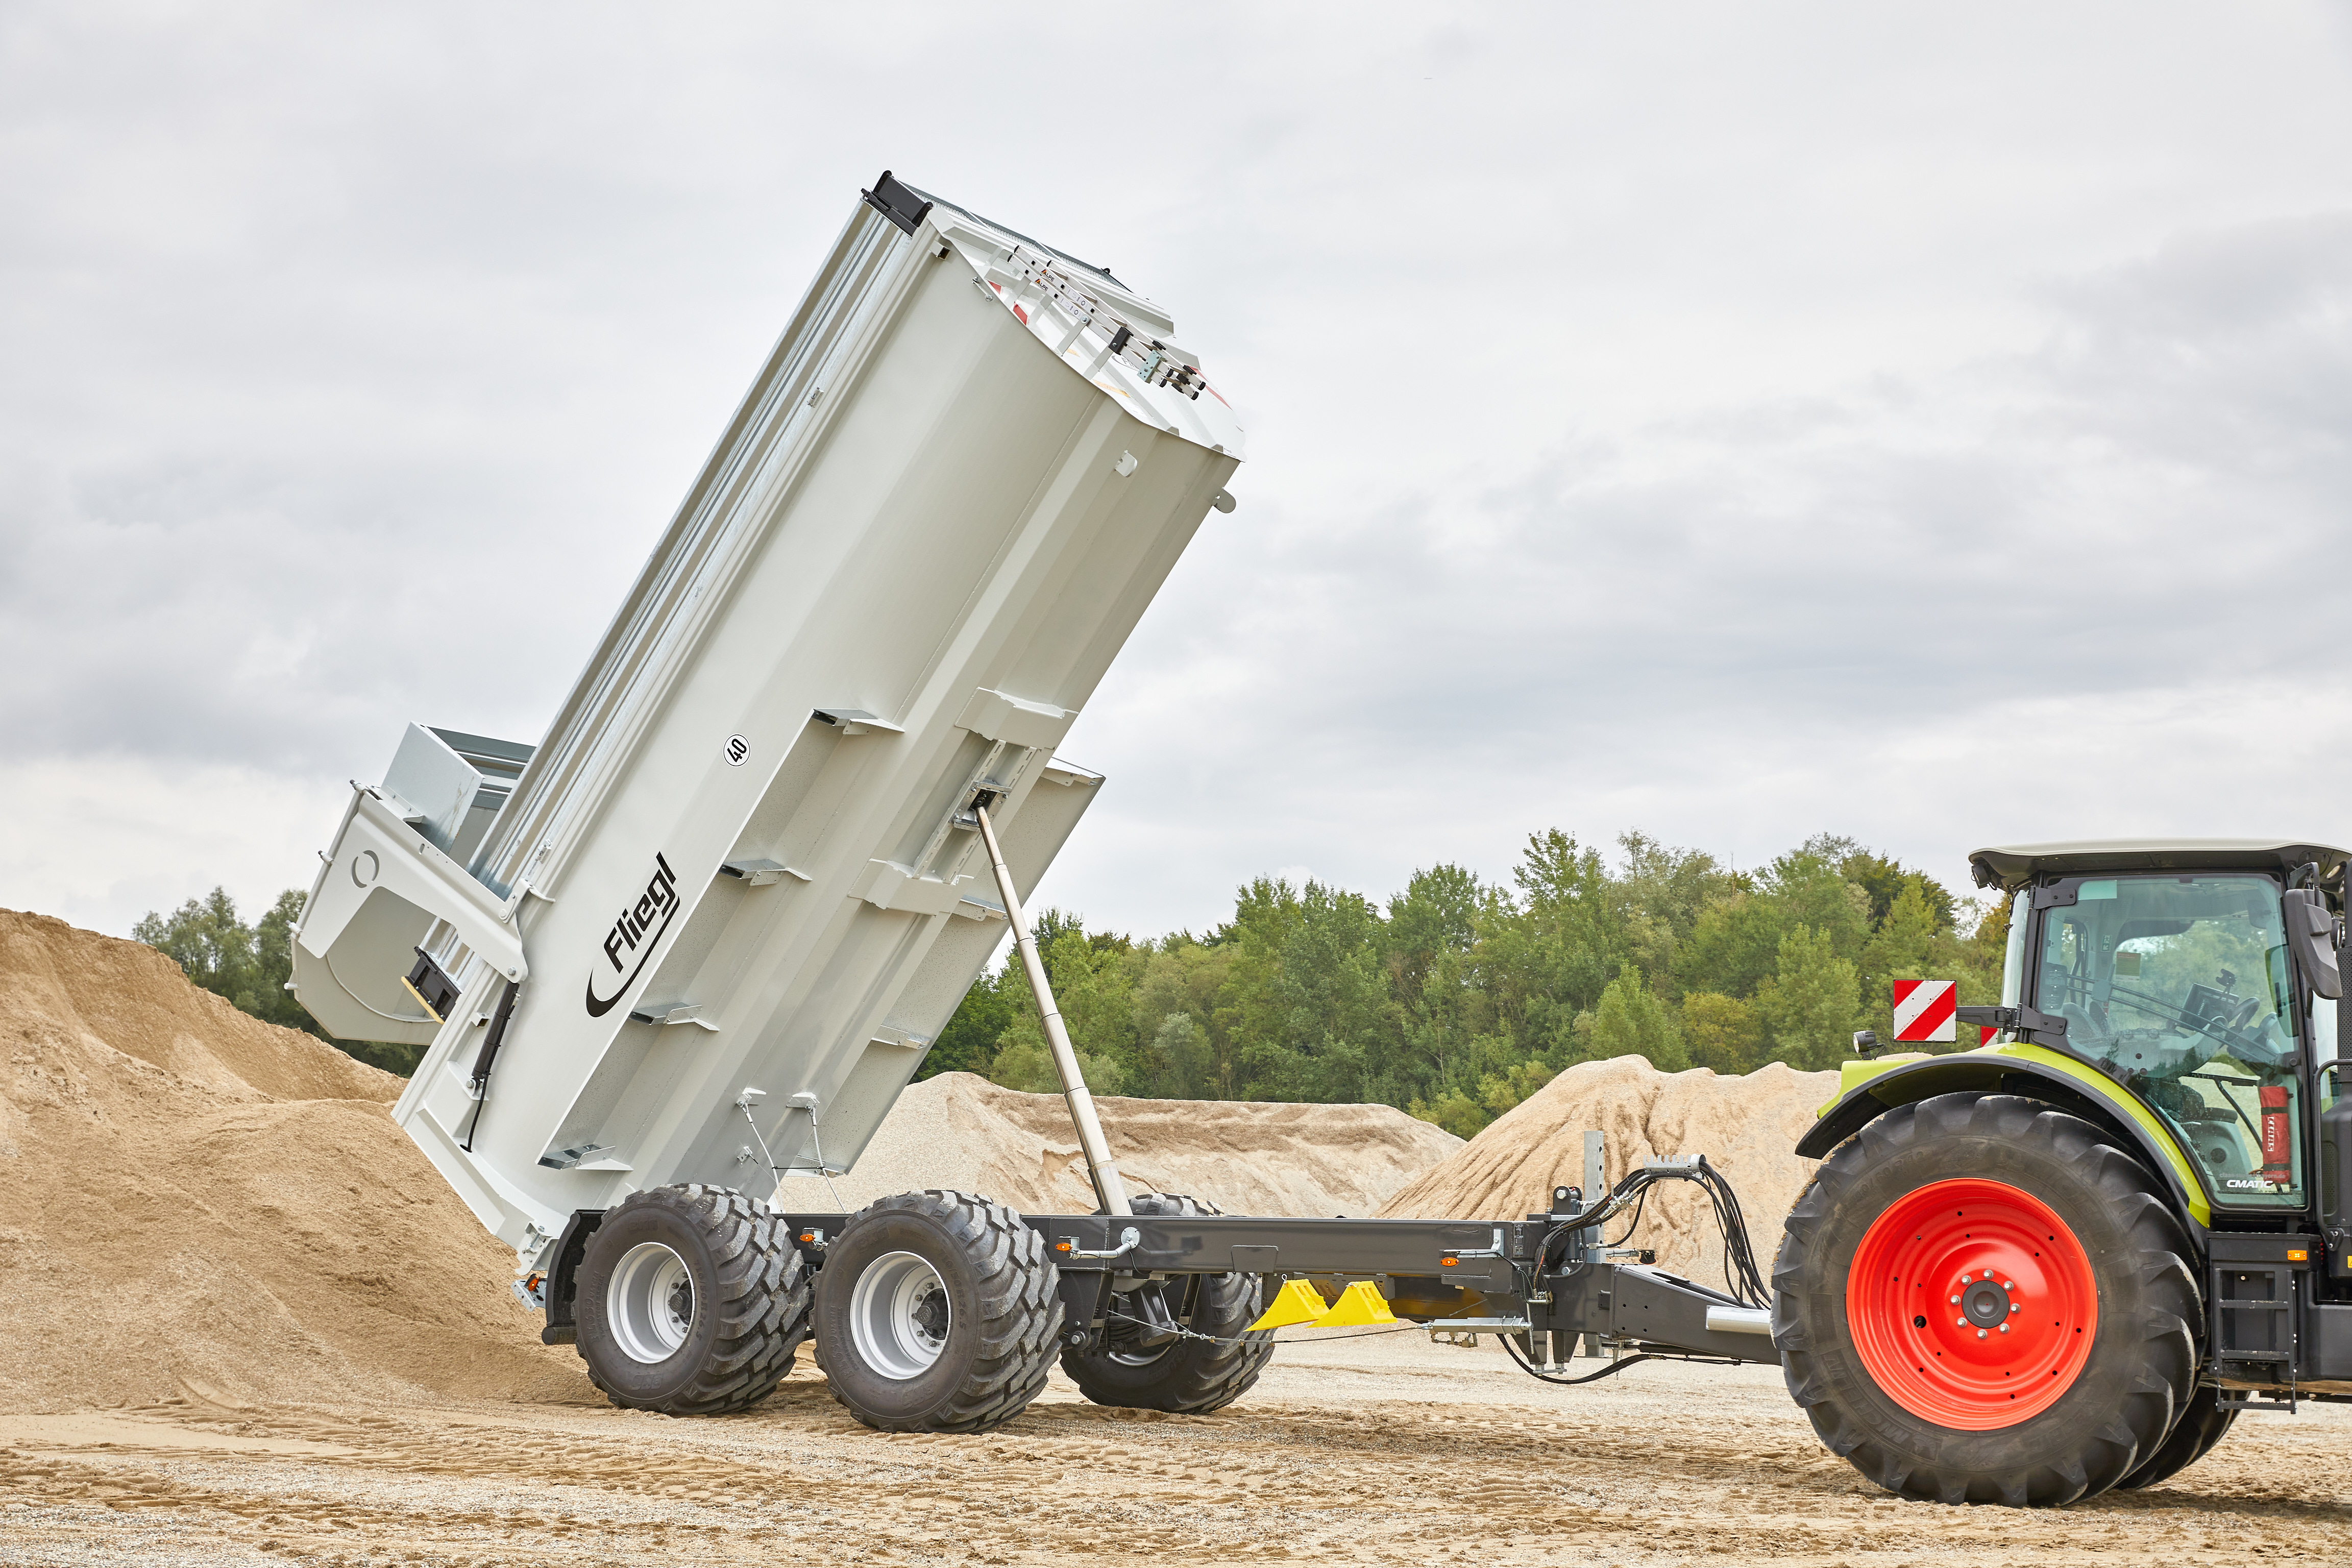 A true all-rounder in the field and on the road - the new Fliegl heavy-duty dump body TMK 266 S PROFI